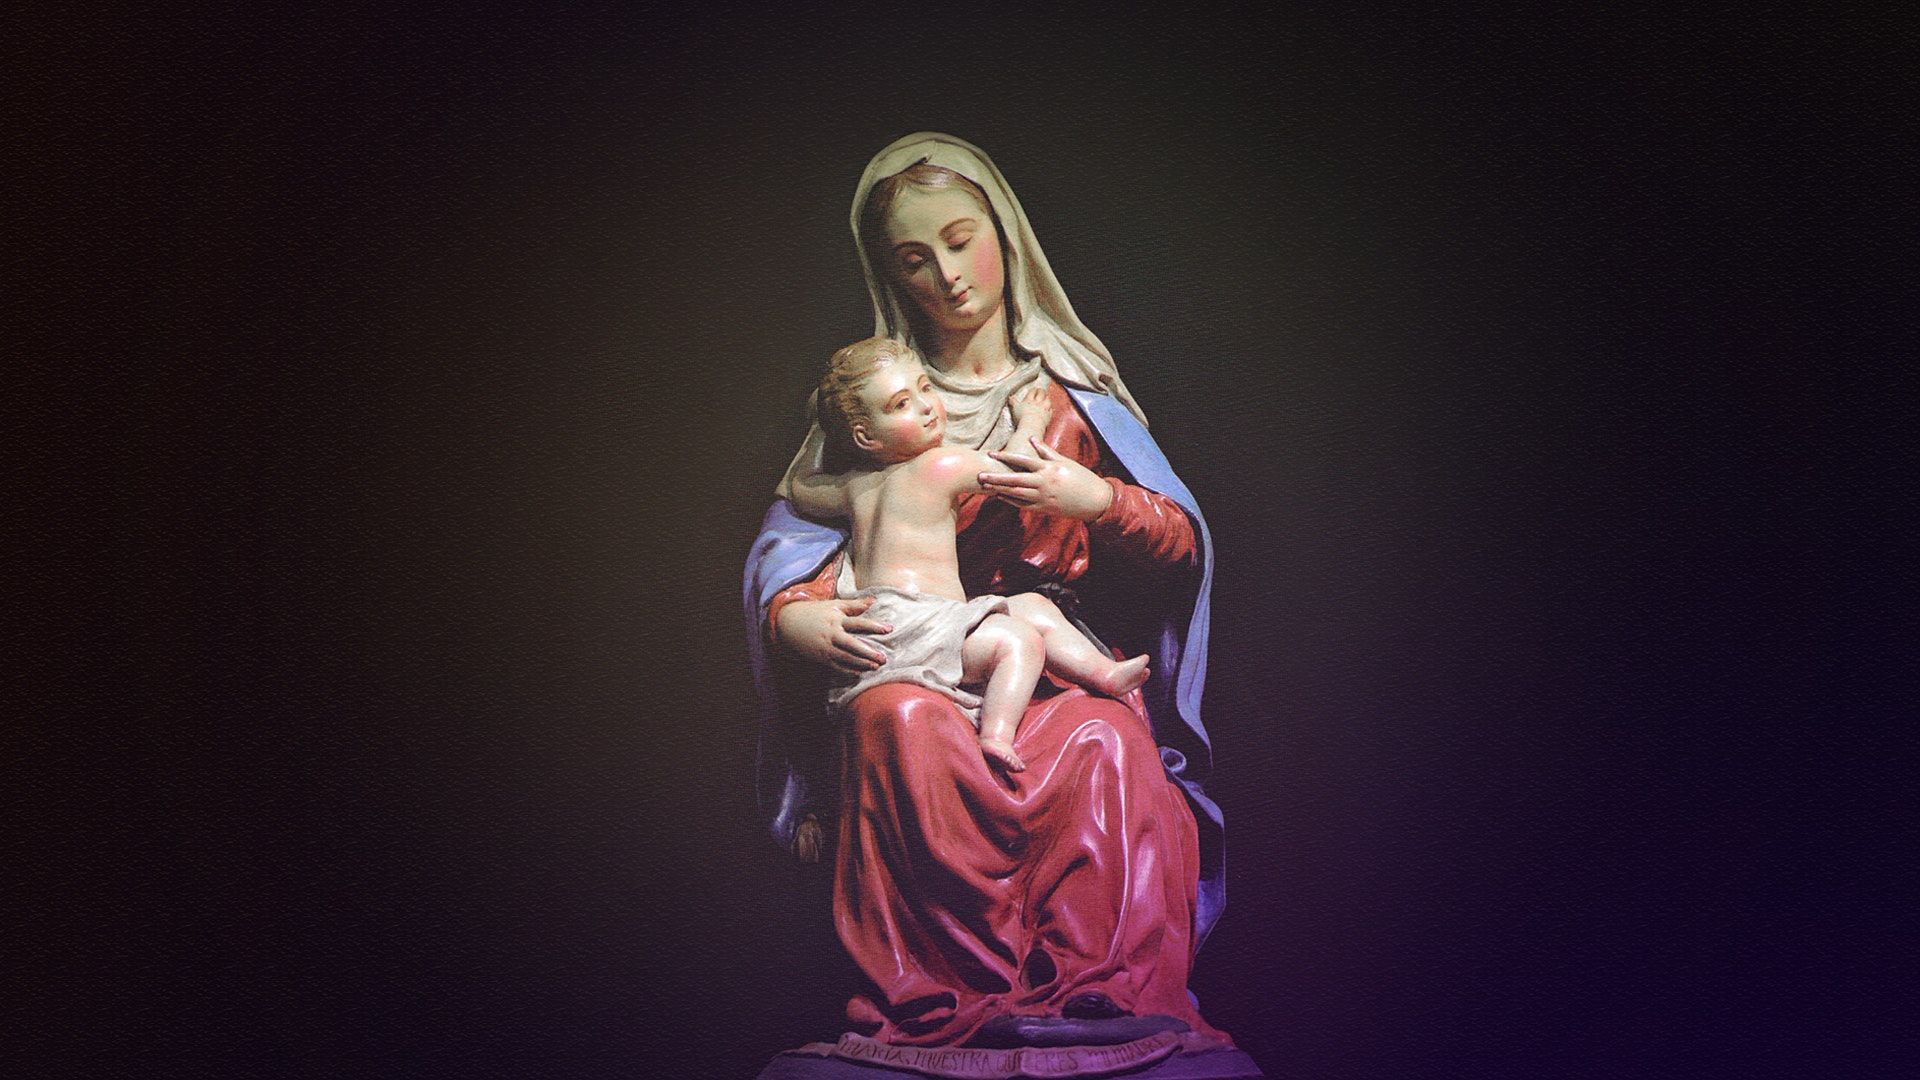 Unique Jesus And Mother Mary Image Free Download